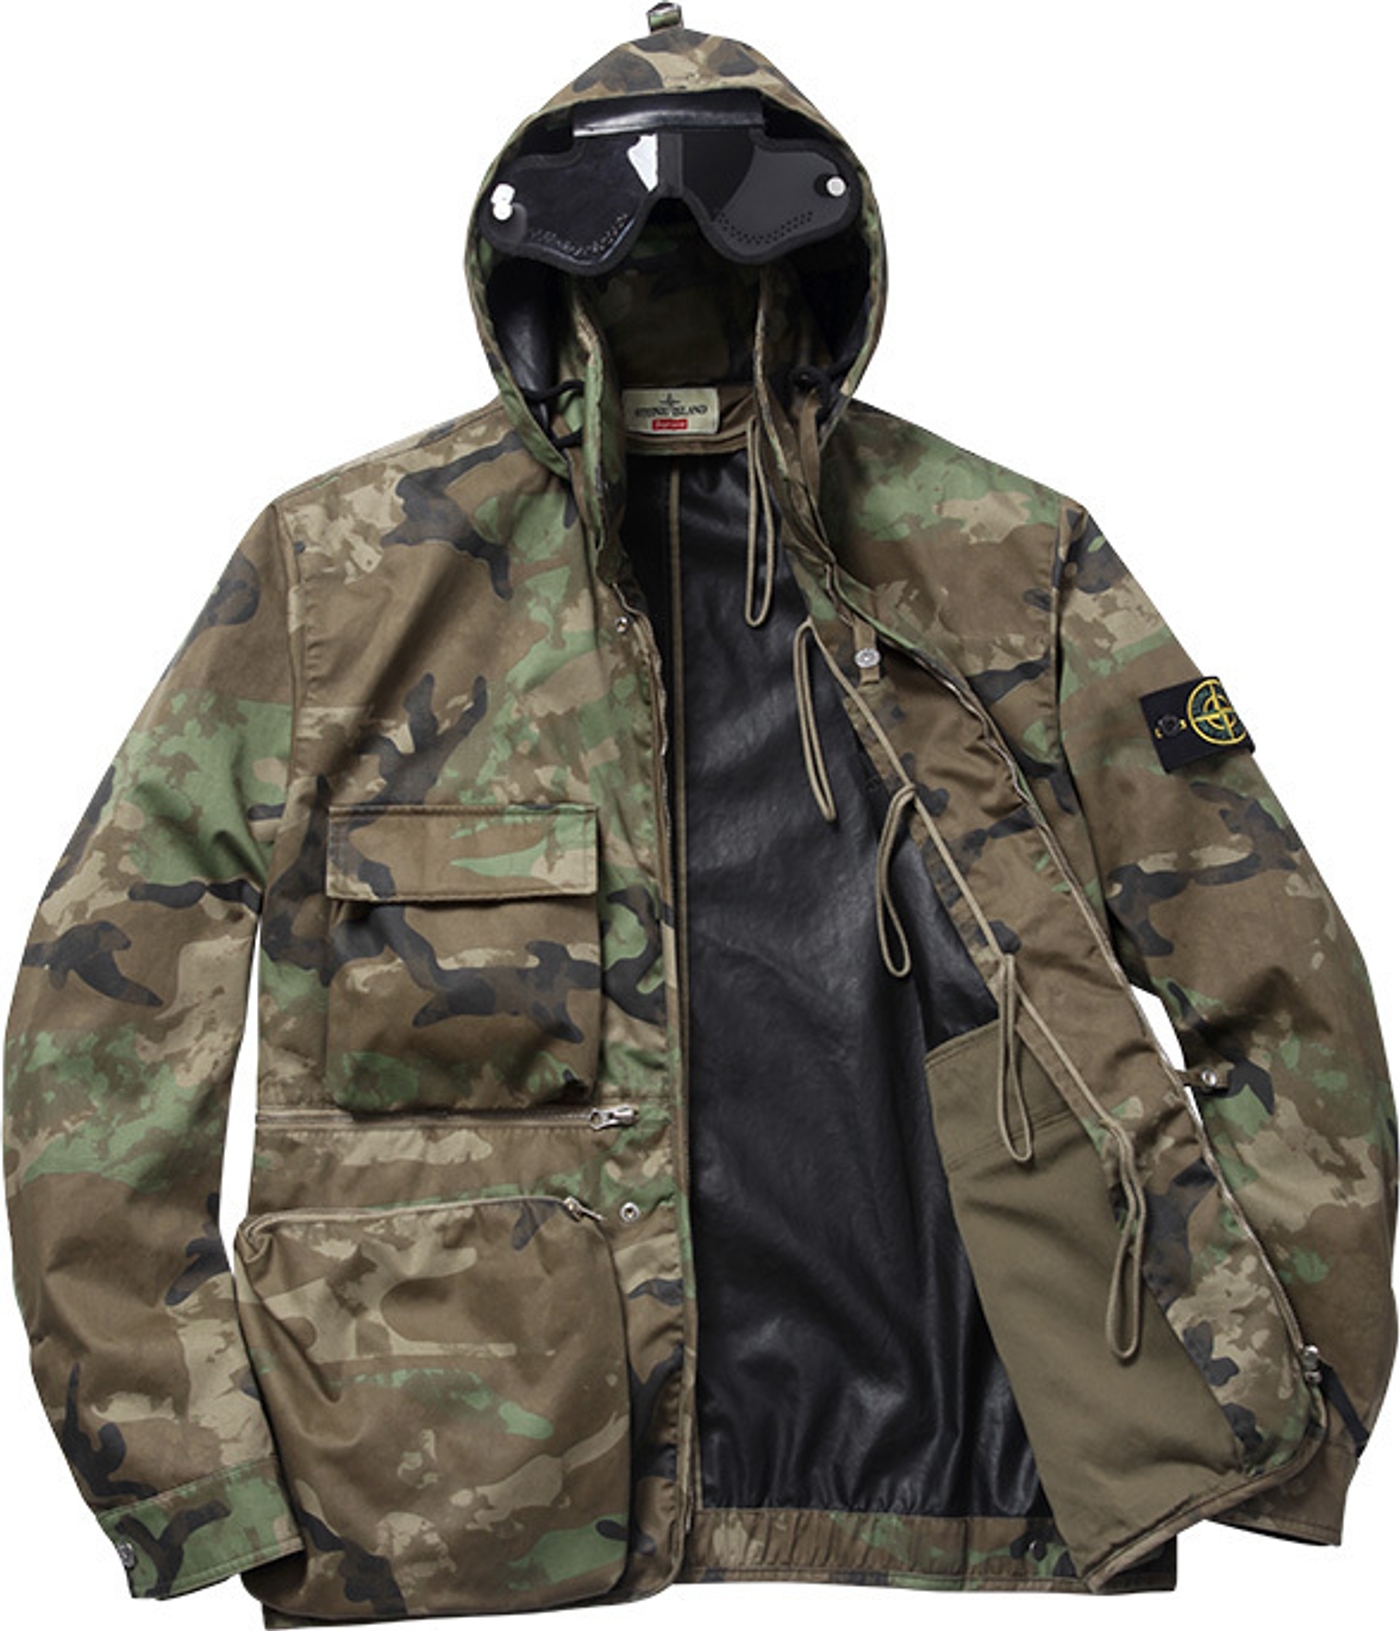 Raso Gommato Cover Nero Jacket 
Wind and water-resistant cotton with removable down liner. Removable eye mask with stow away hood.<br>
Made by Stone Island<br> (14/36)